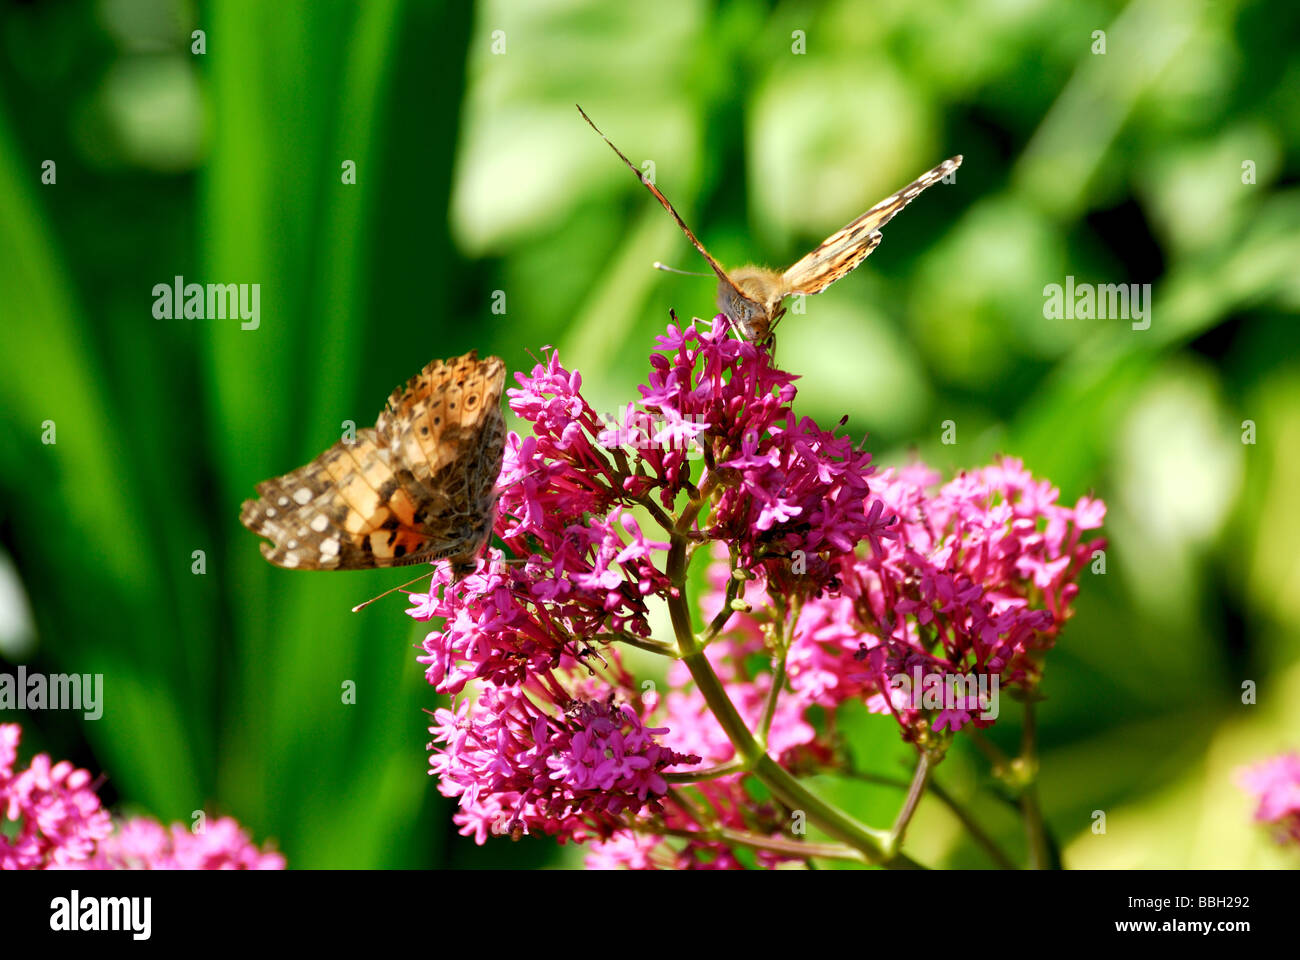 Painted lady butterfly on flowers Stock Photo